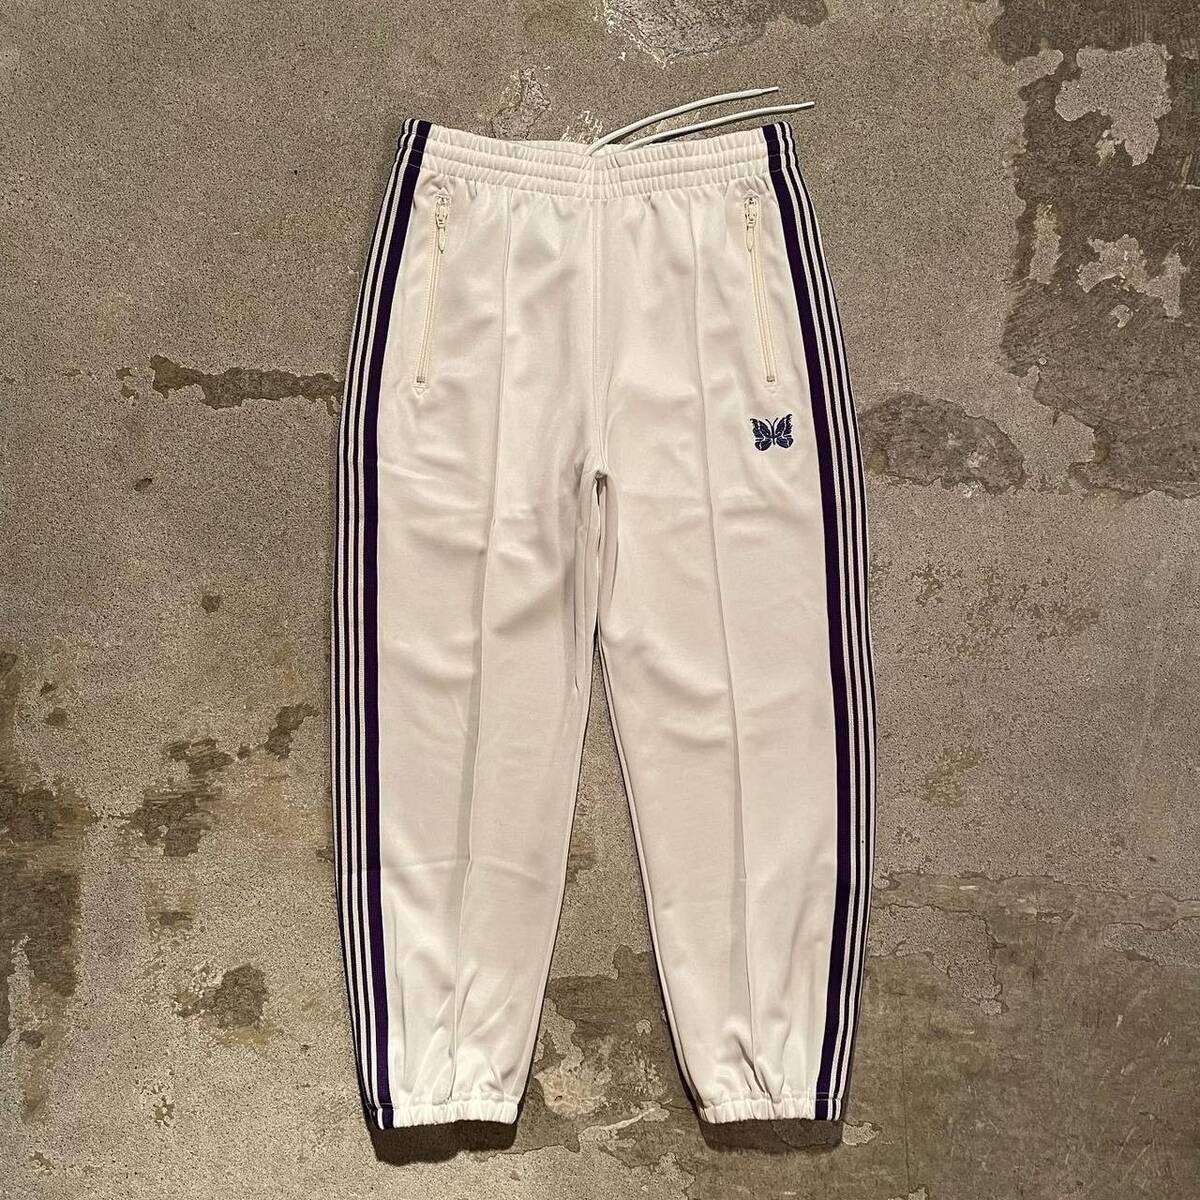 NEEDELS "Zipped Track Pant - Poly Smooth" - 画像1枚目